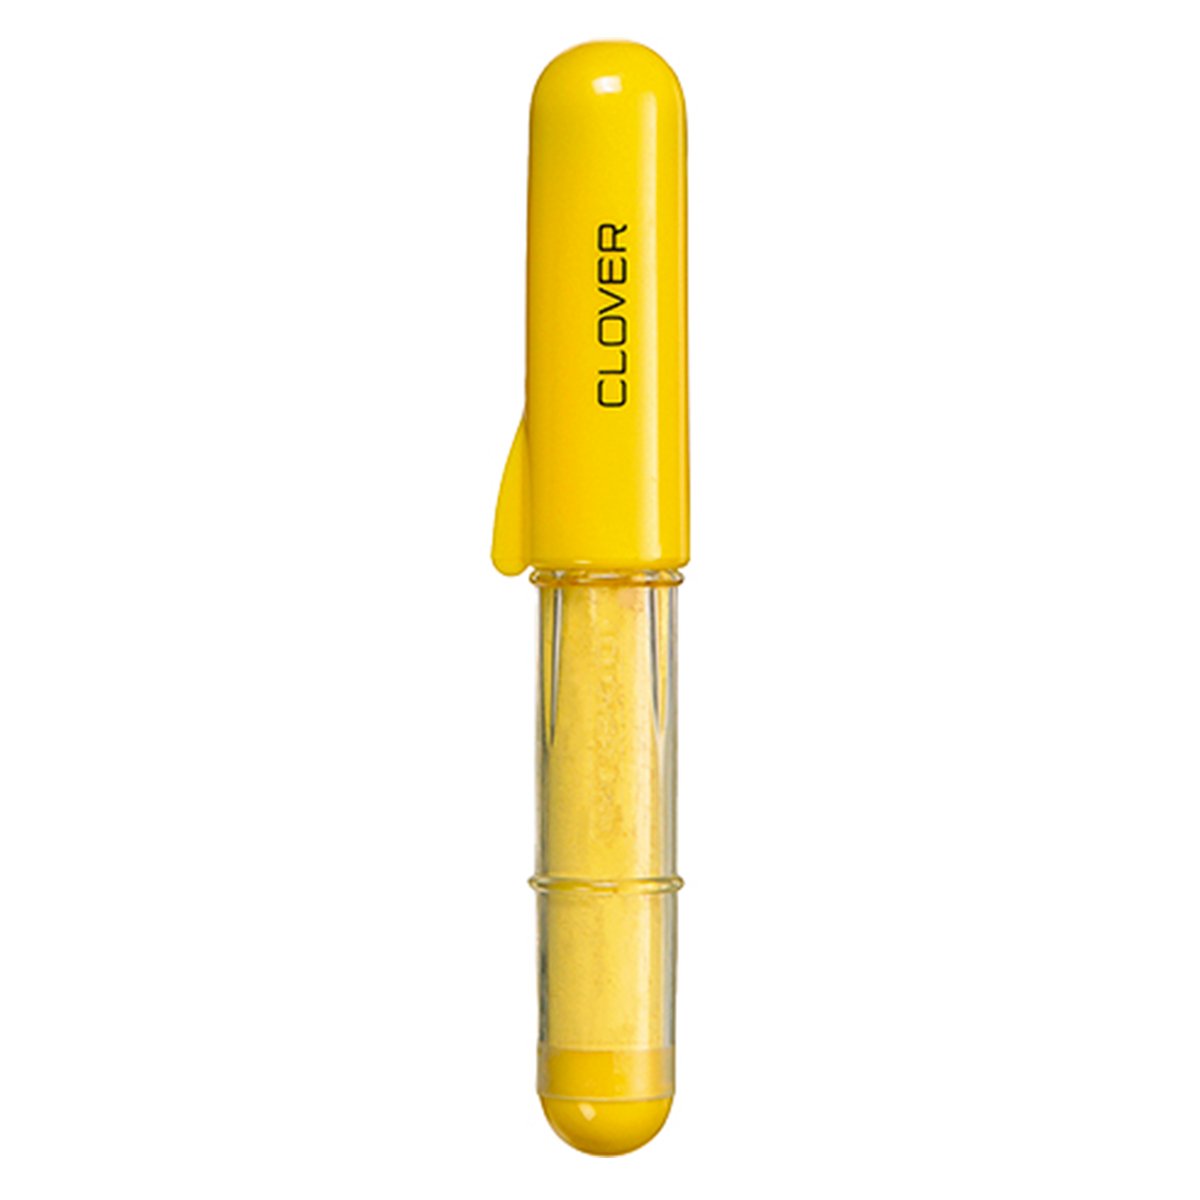 CLV - Chaco Liner Pen Style (Yellow) - 0